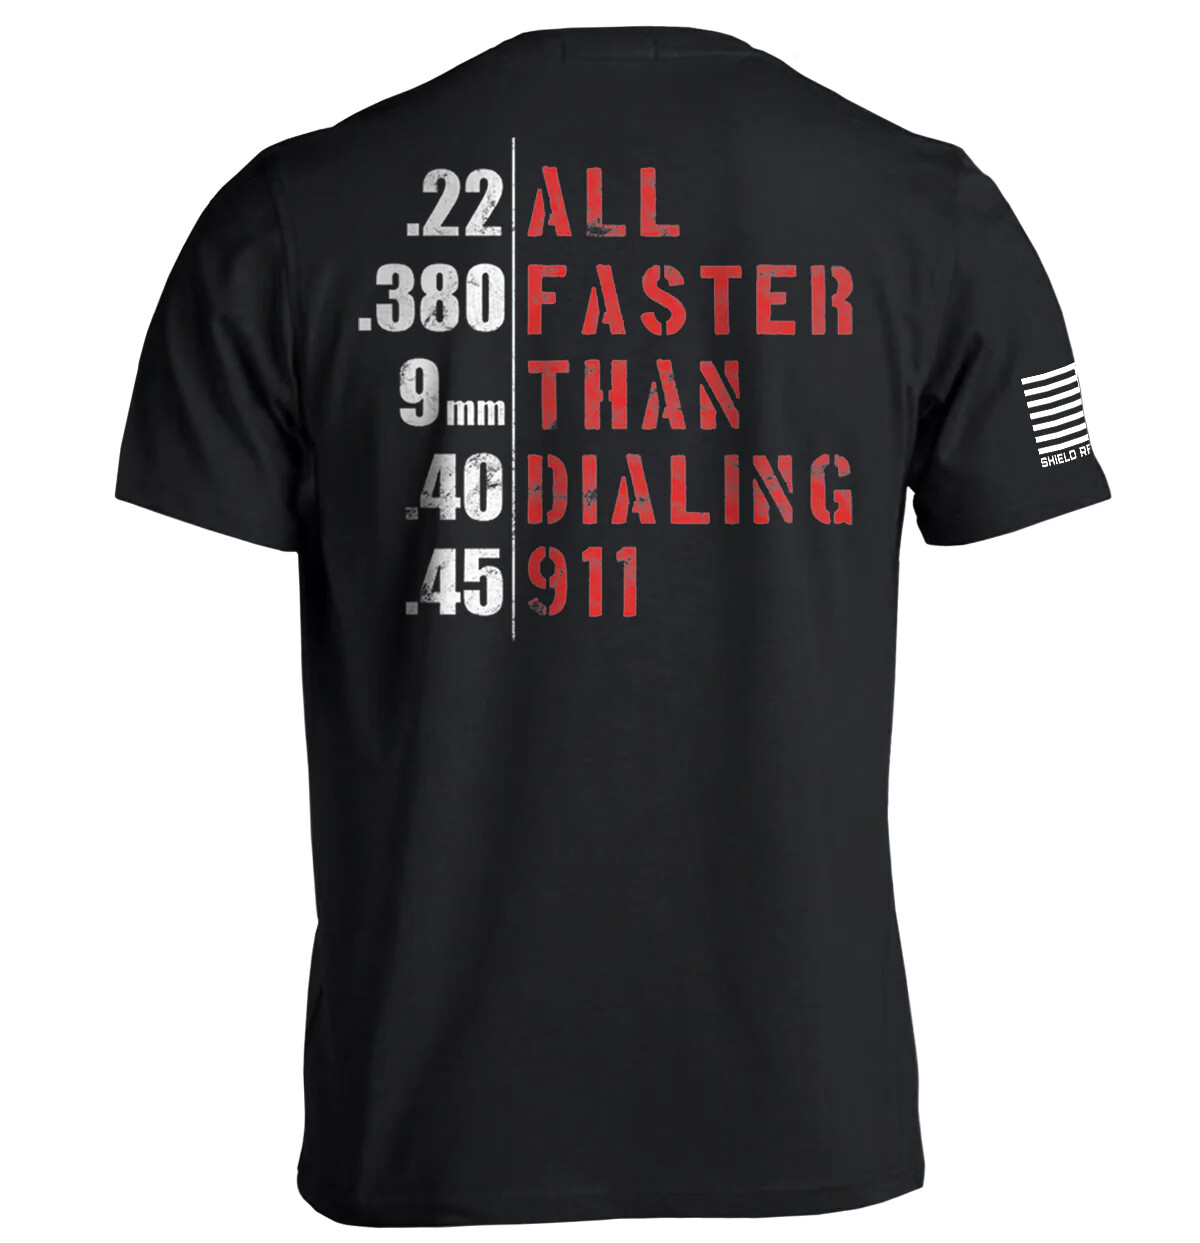 All Faster Tee, Color: Black, Size: SM